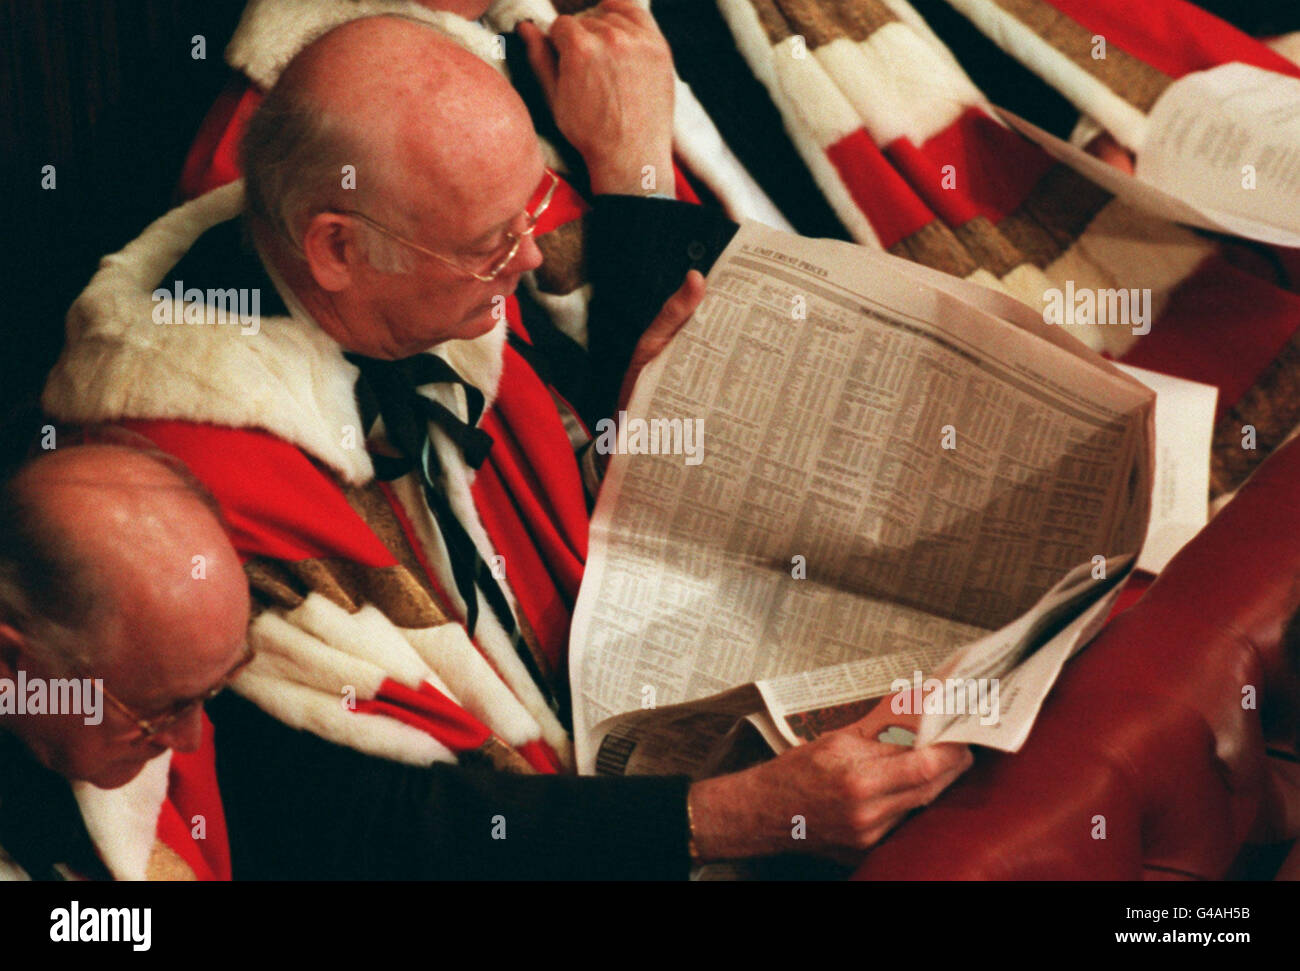 PA NEWS PHOTO 18/11/93 A PEER READS THROUGH THE CITY PAGES OF A NEWSPAPER BEFORE THE QUEEN'S SPEECH IN THE HOUSE OF LORDS, LONDON Stock Photo